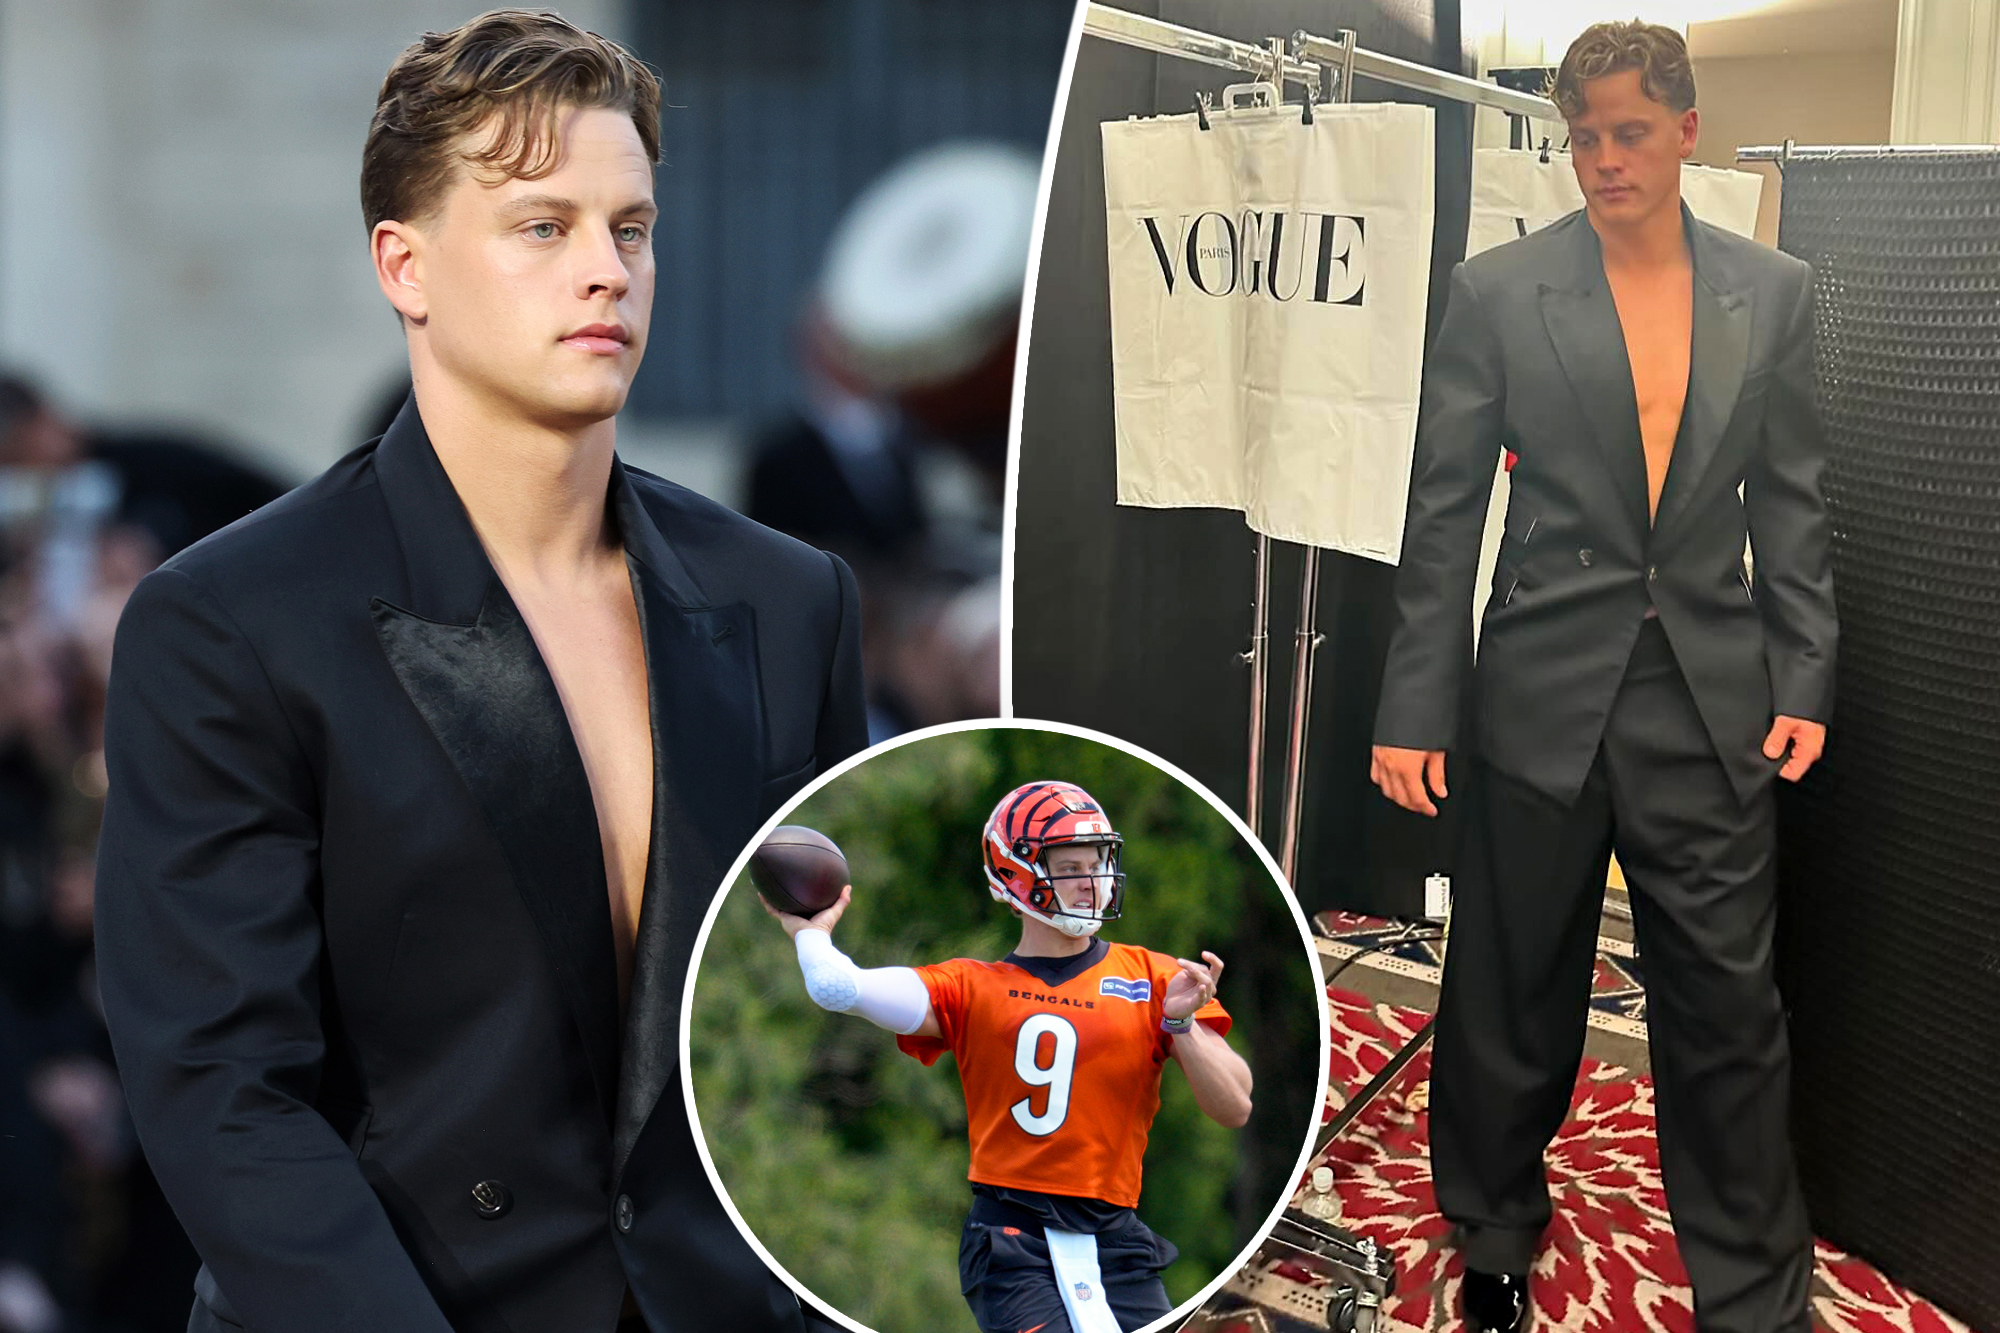 Joe Burrow's Runway Debut: From Touchdowns to Fashion Crowns